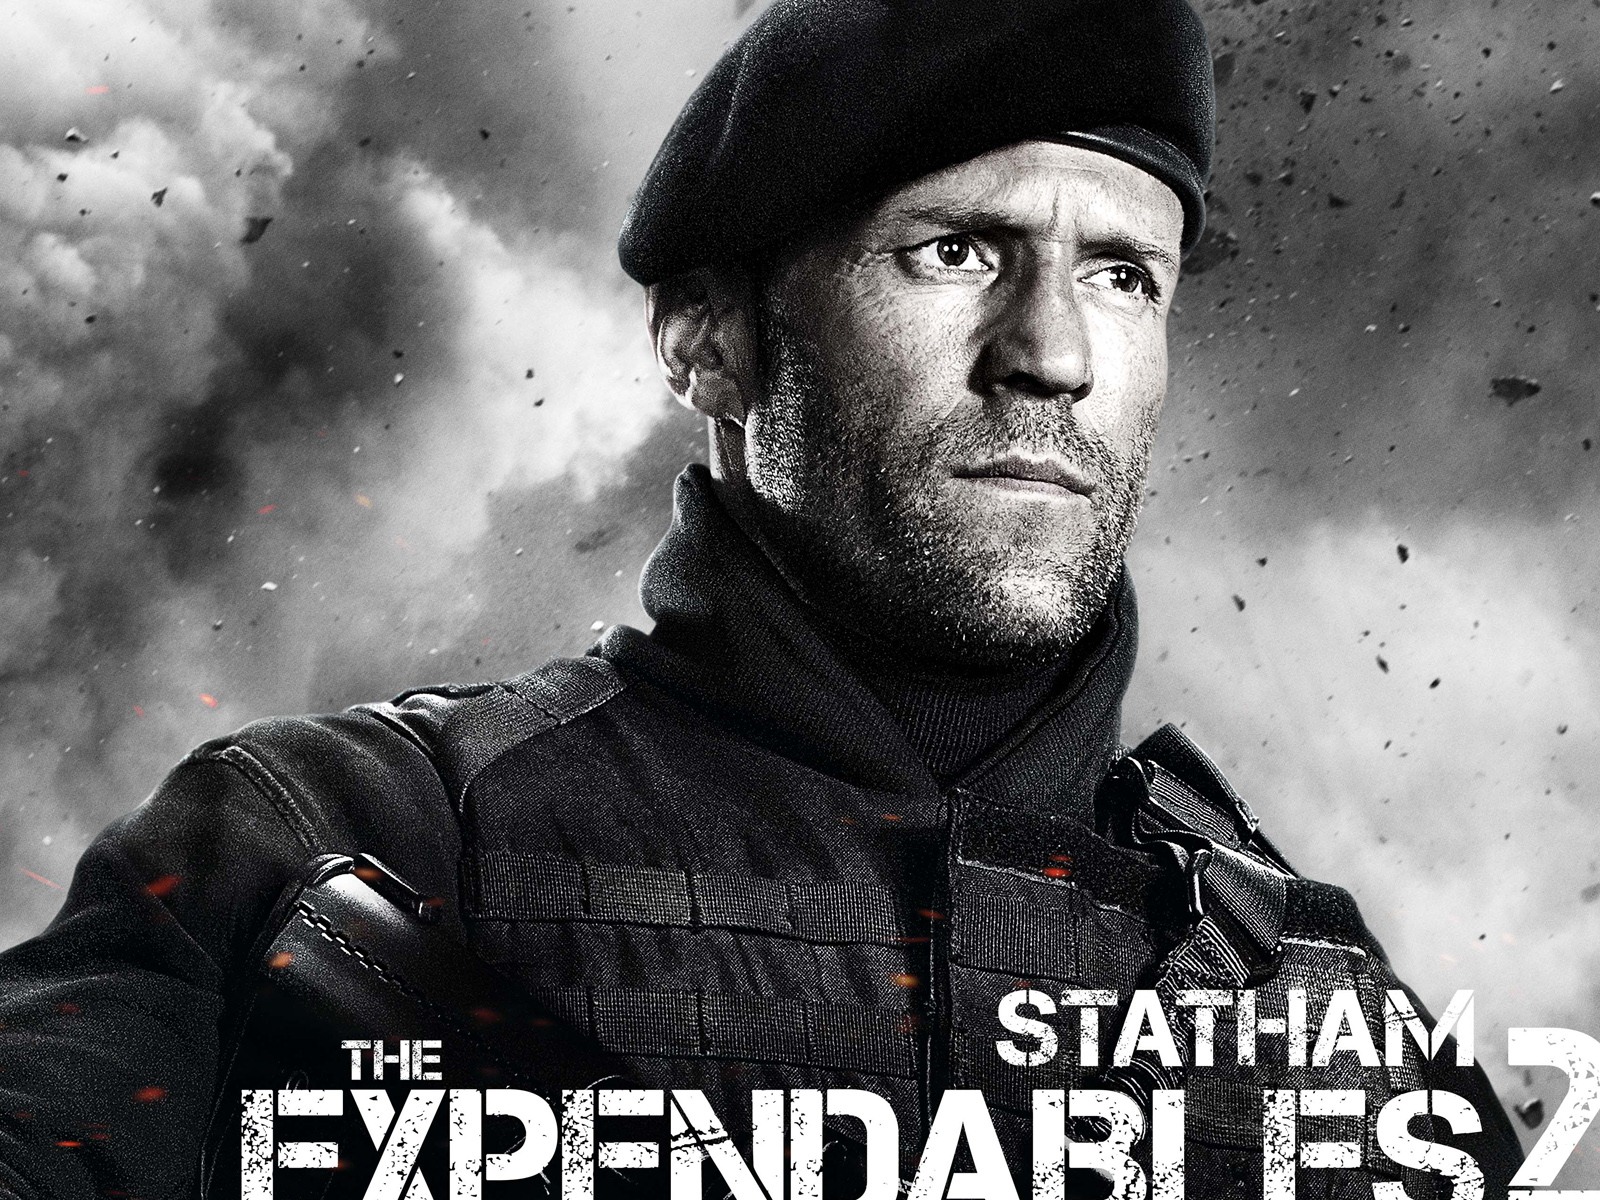 2012 The Expendables 2 HD Wallpaper #5 - 1600x1200